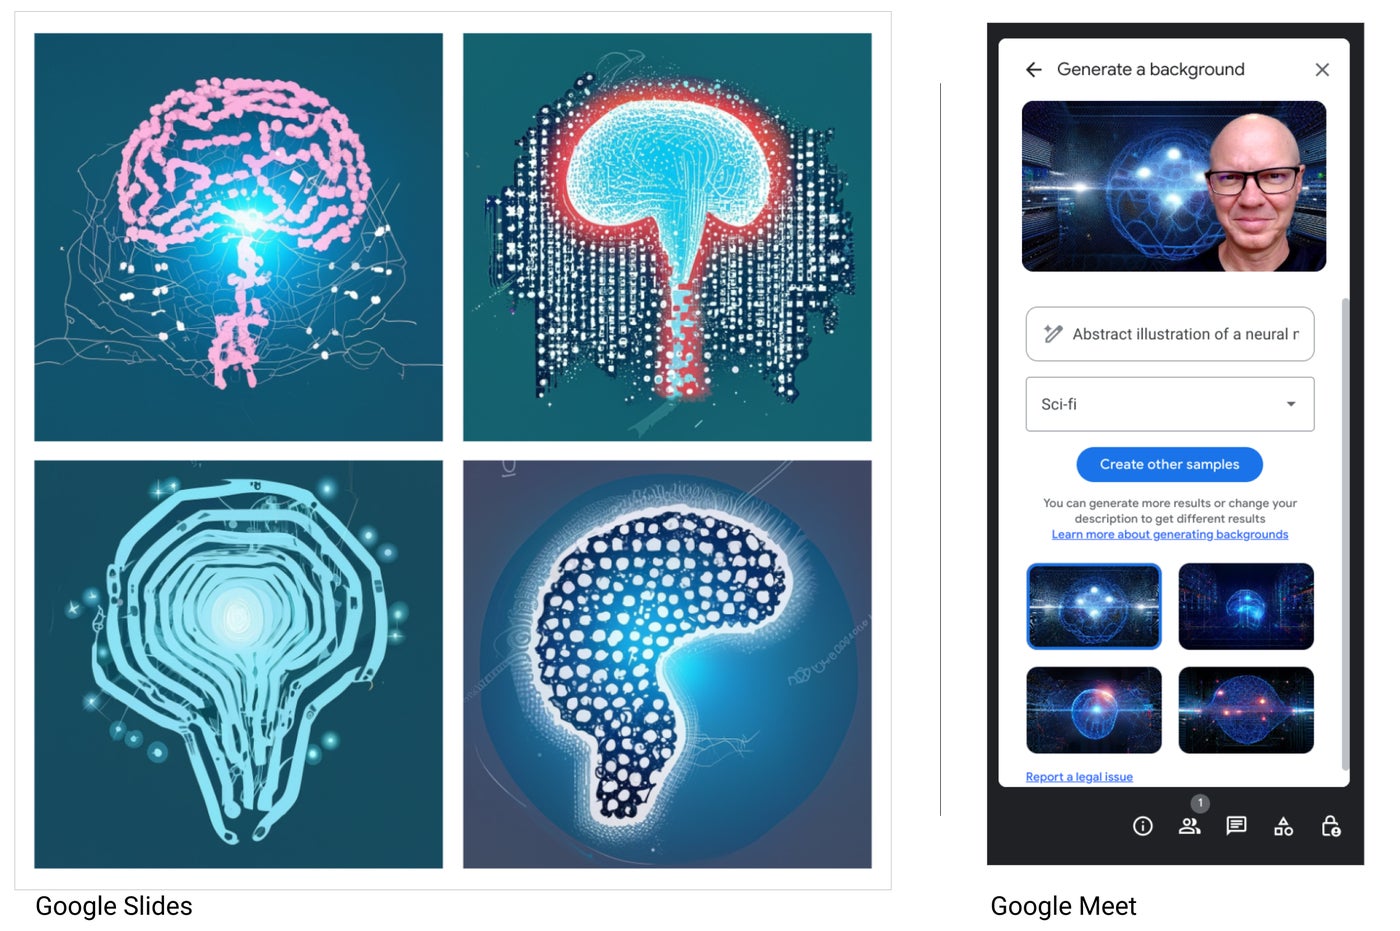 Duet AI generated abstract illustrations for Google Slide and Google Meet.